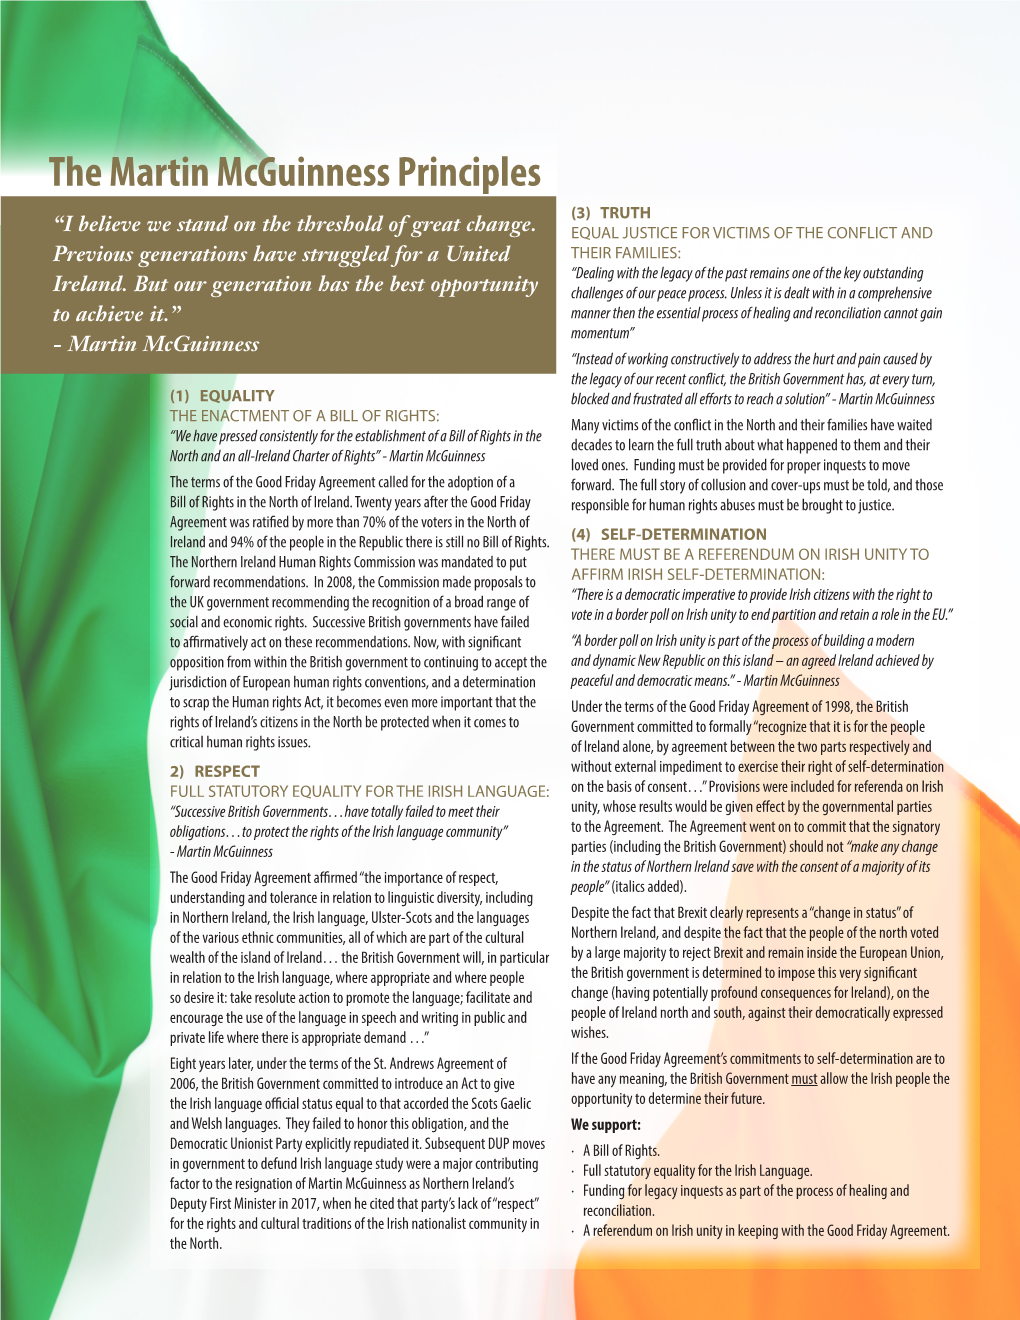 The Martin Mcguinness Principles (3) TRUTH “I Believe We Stand on the Threshold of Great Change